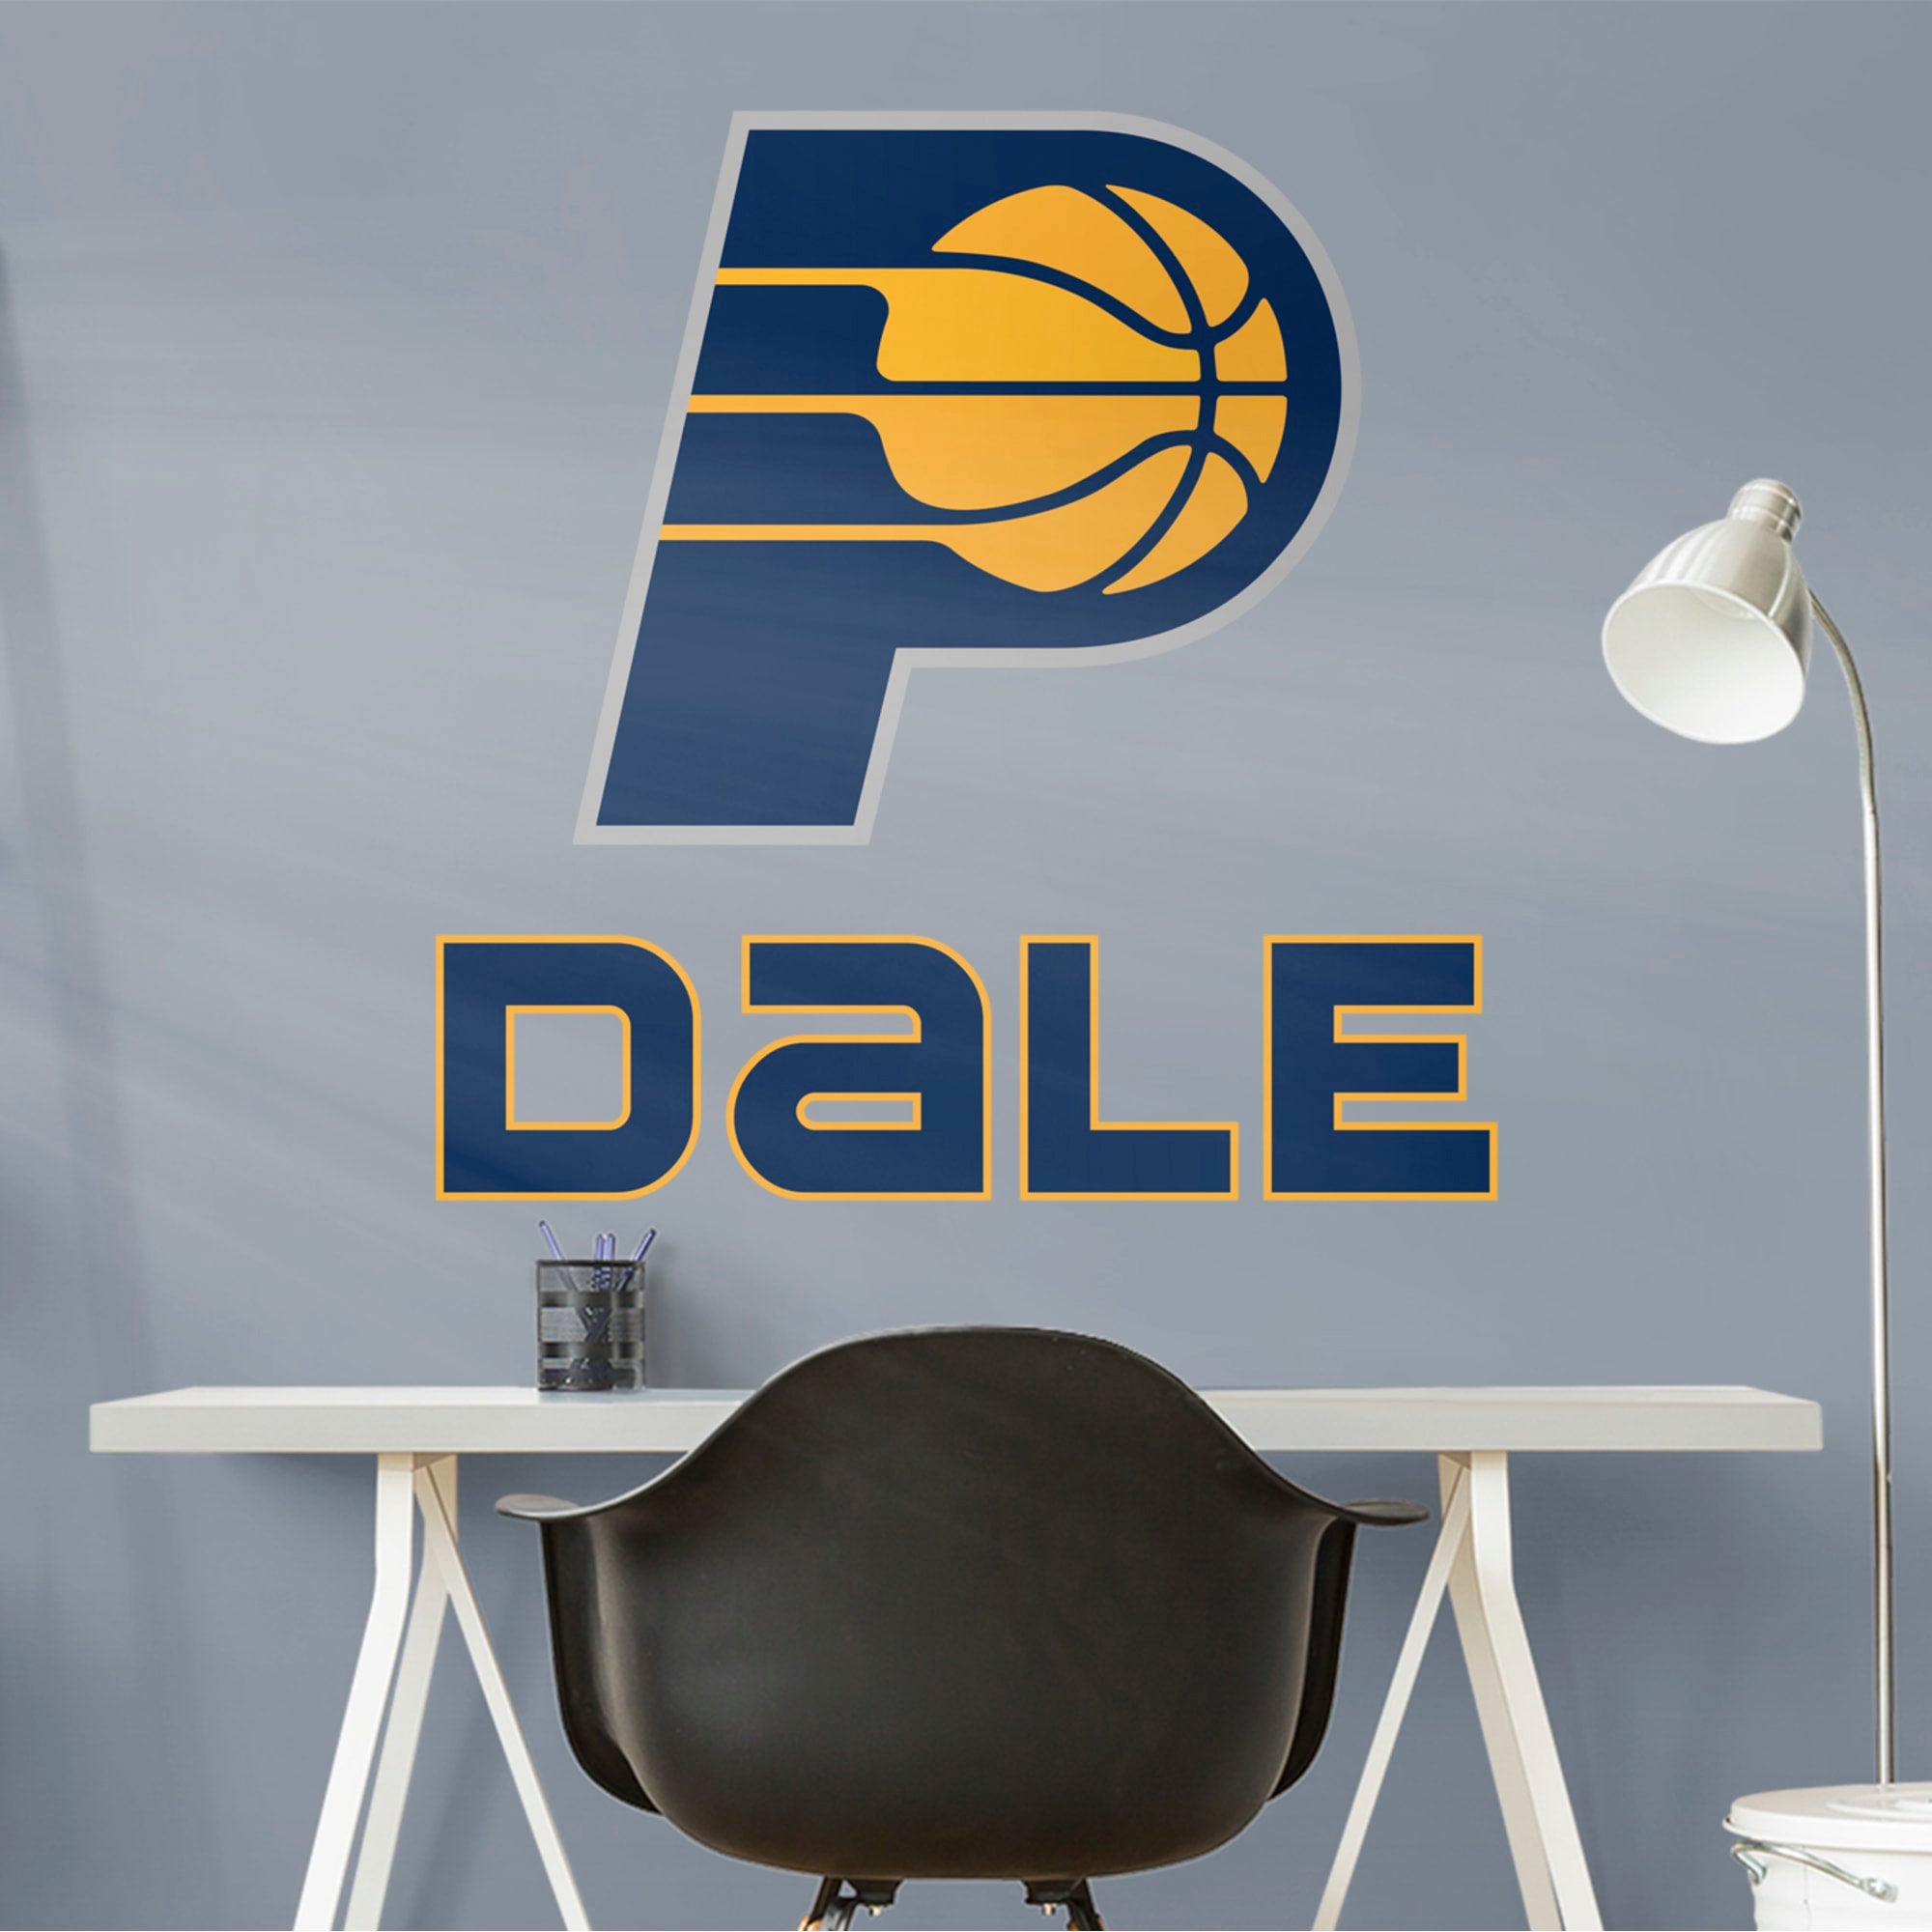 Indiana Pacers: Stacked Personalized Name - Officially Licensed NBA Transfer Decal in Navy (39.5"W x 52"H) by Fathead | Vinyl